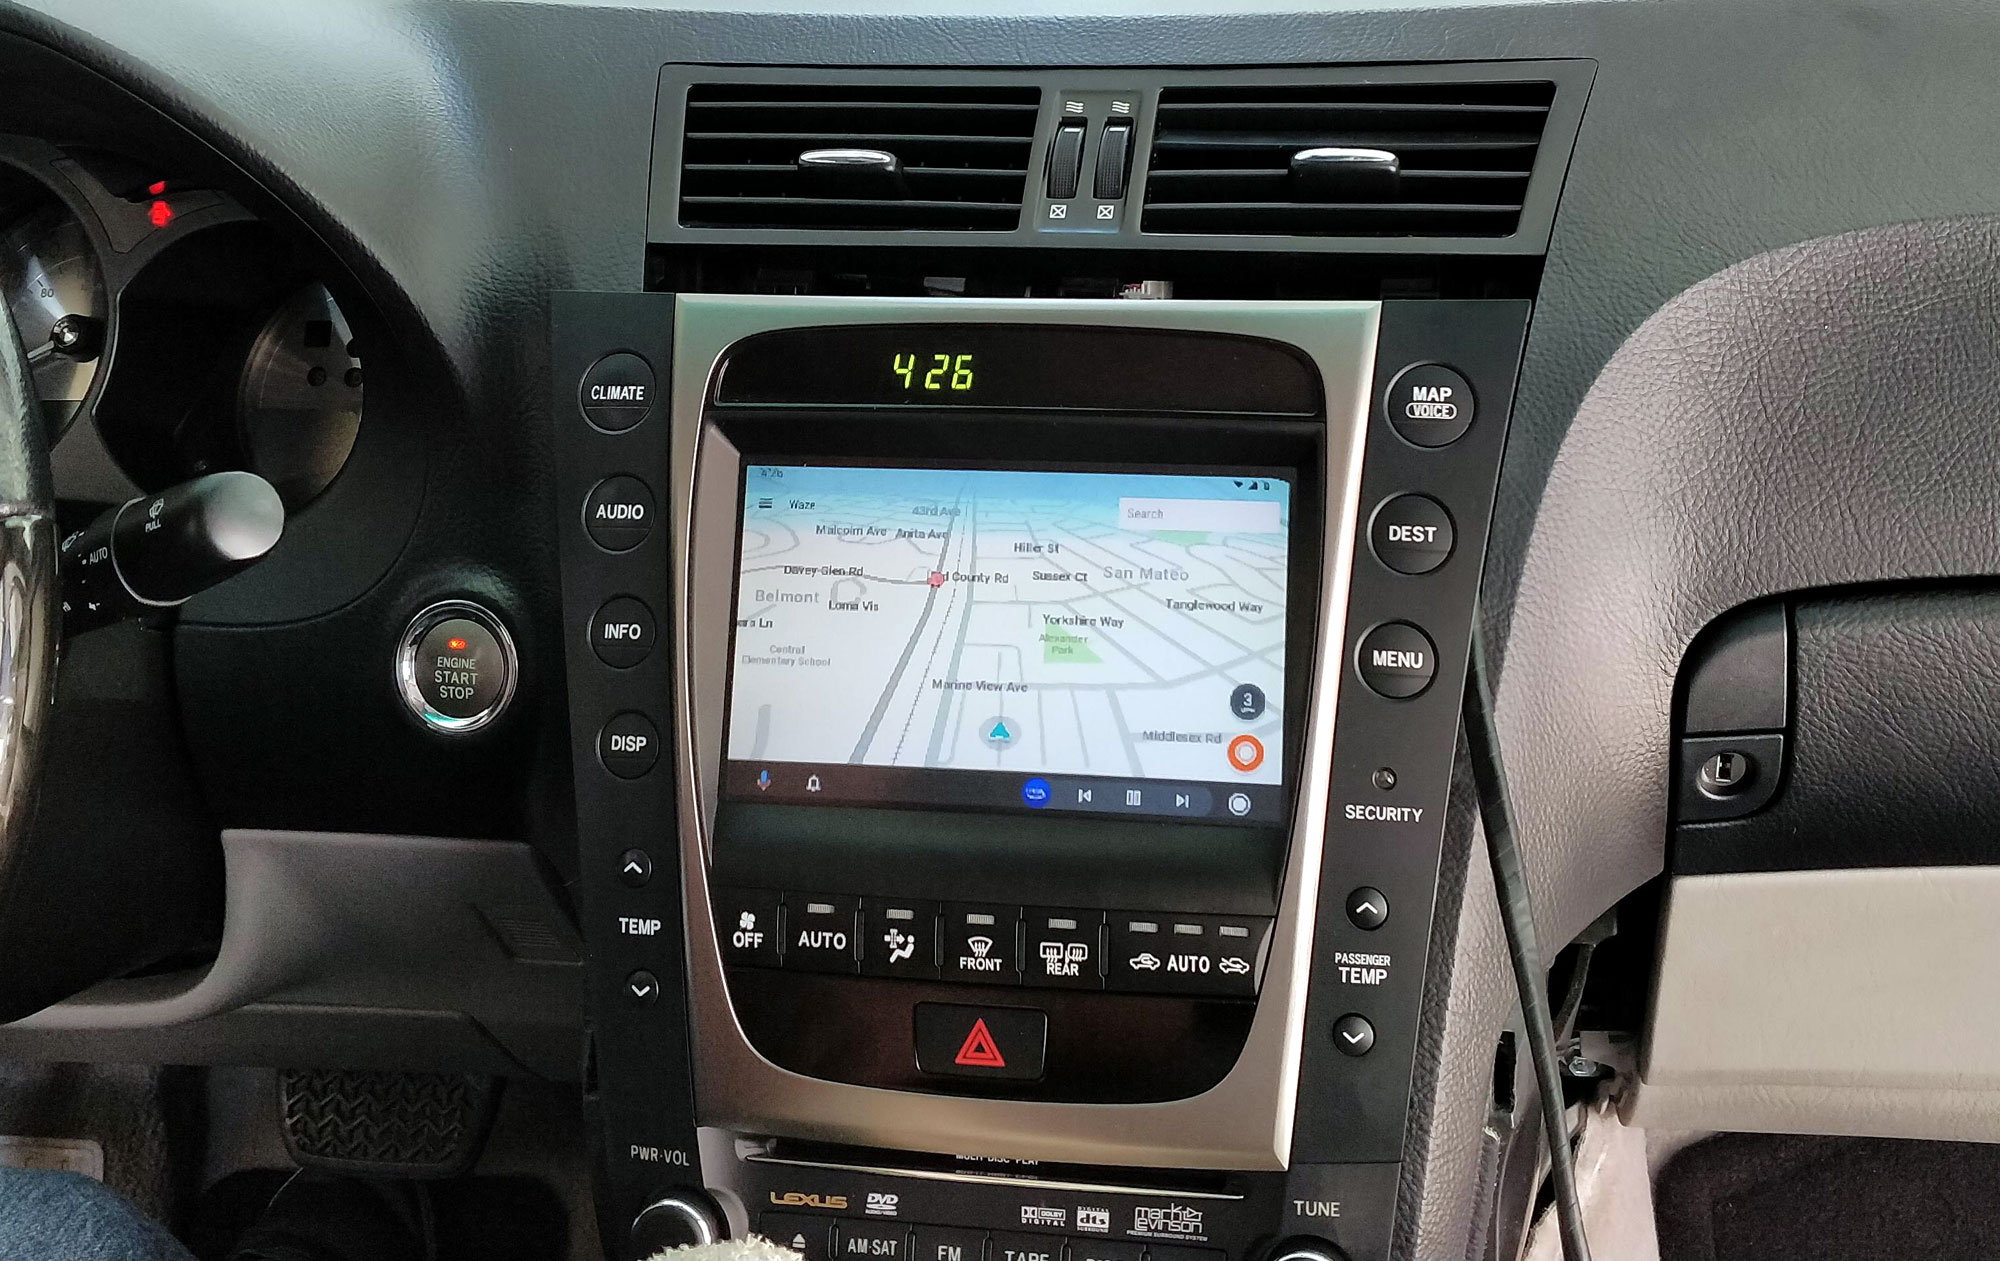 GS 300/350/430 2006 owners VLine VL2 Android Navigation